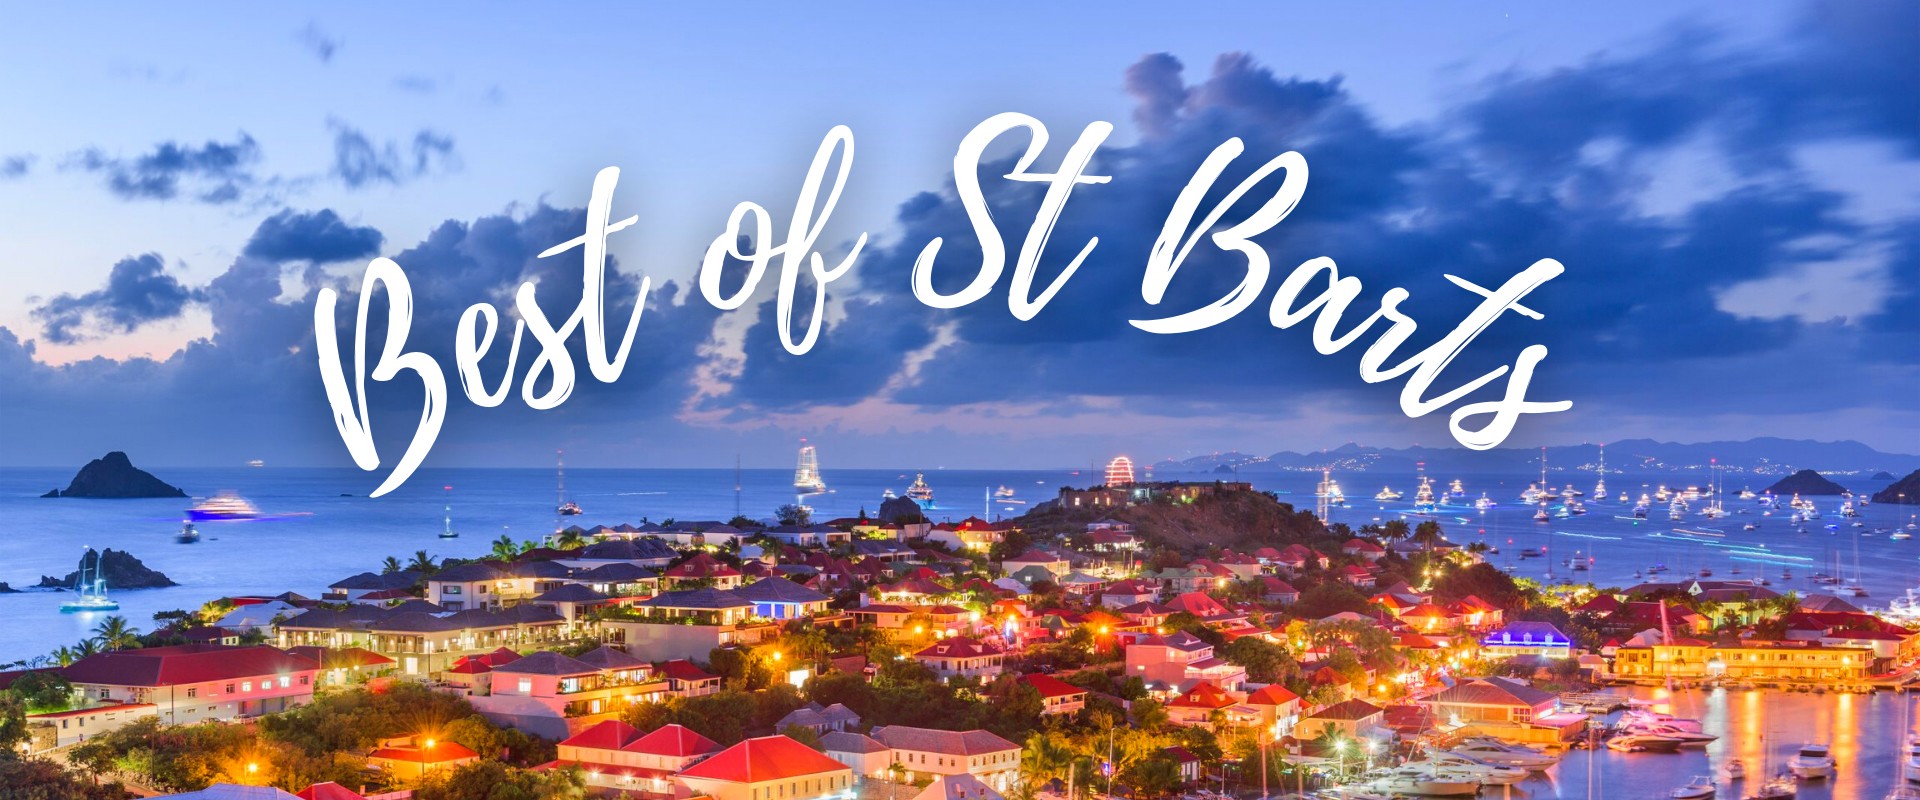 The Best Things to Do in St Barts